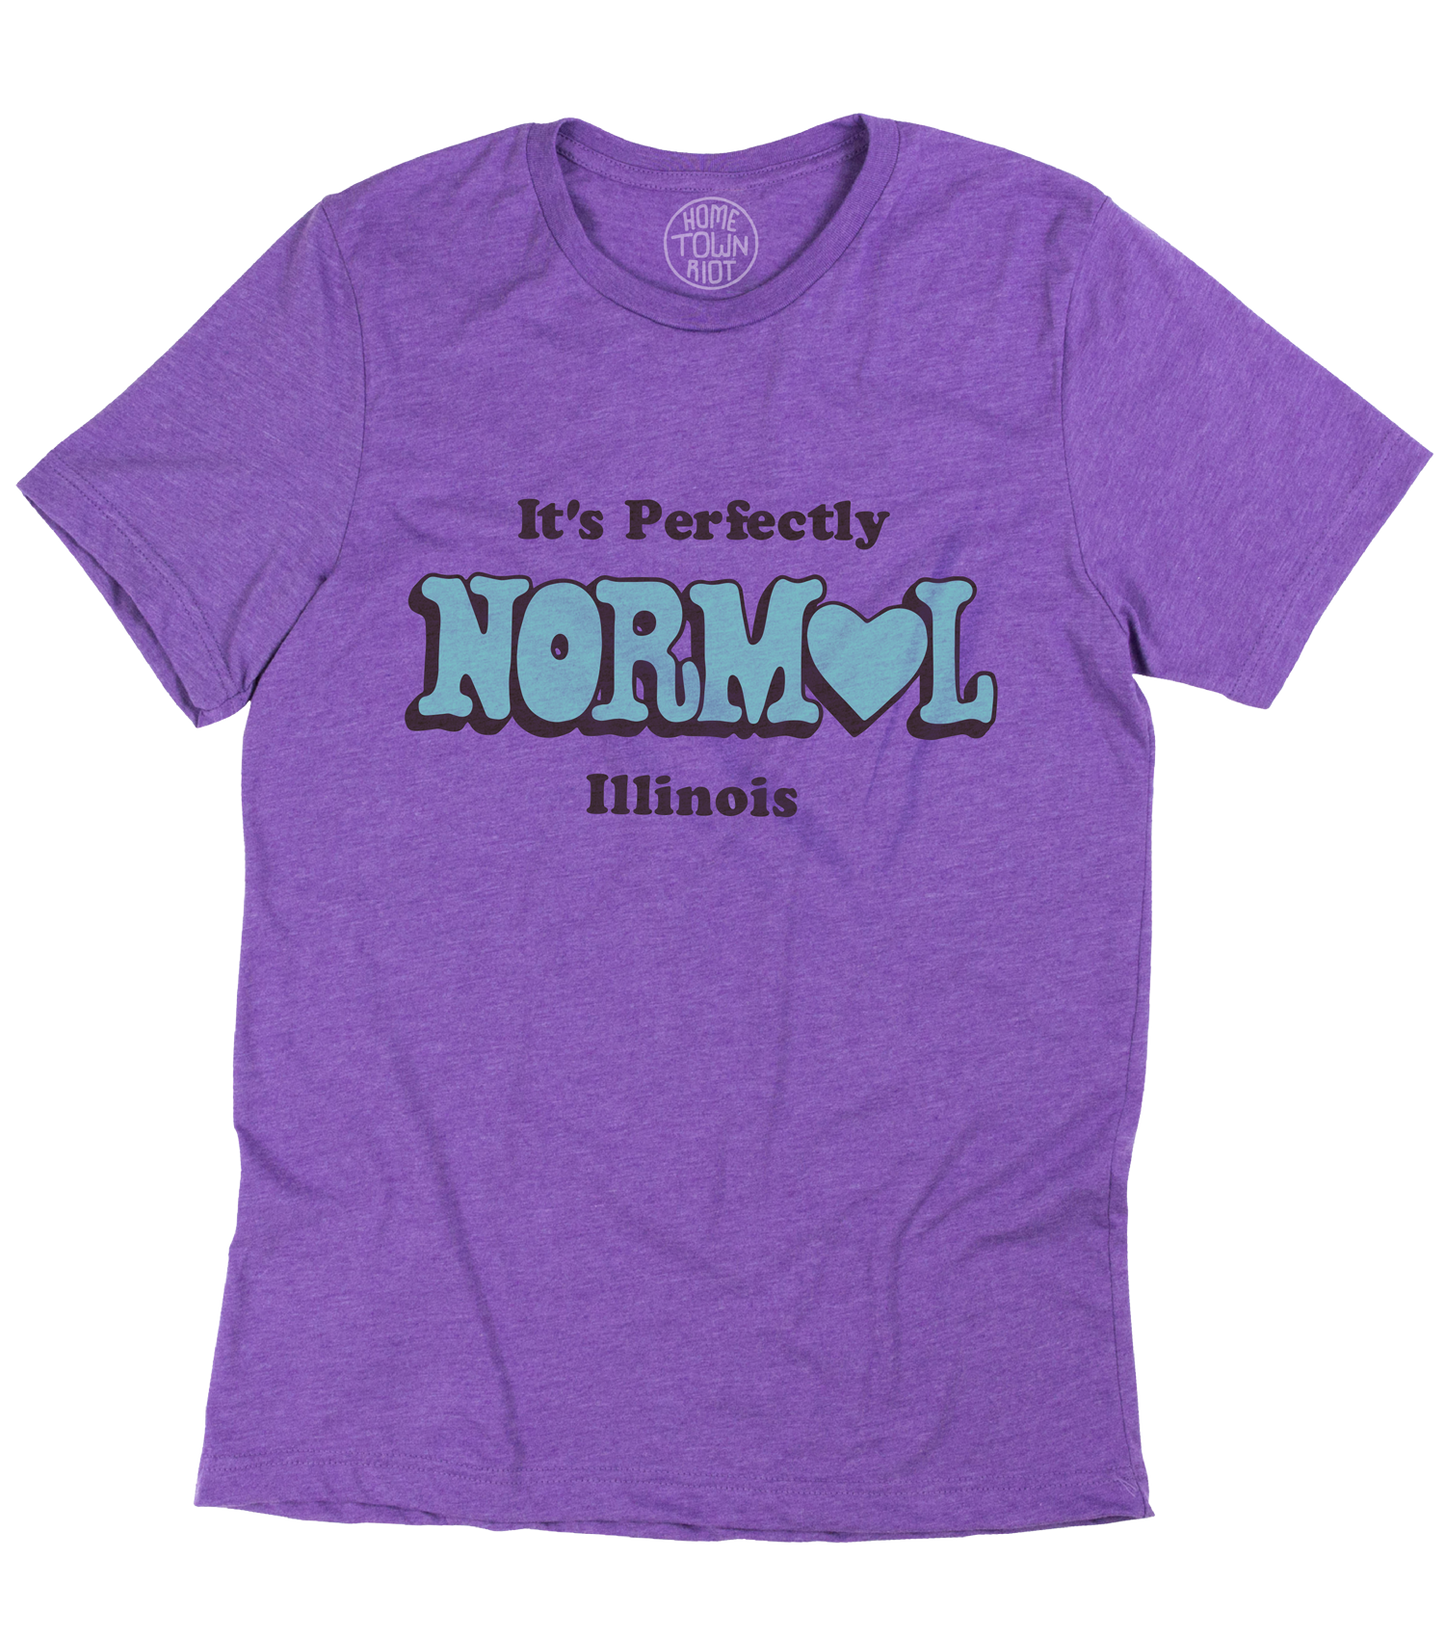 It's Perfectly Normal Illinois Shirt